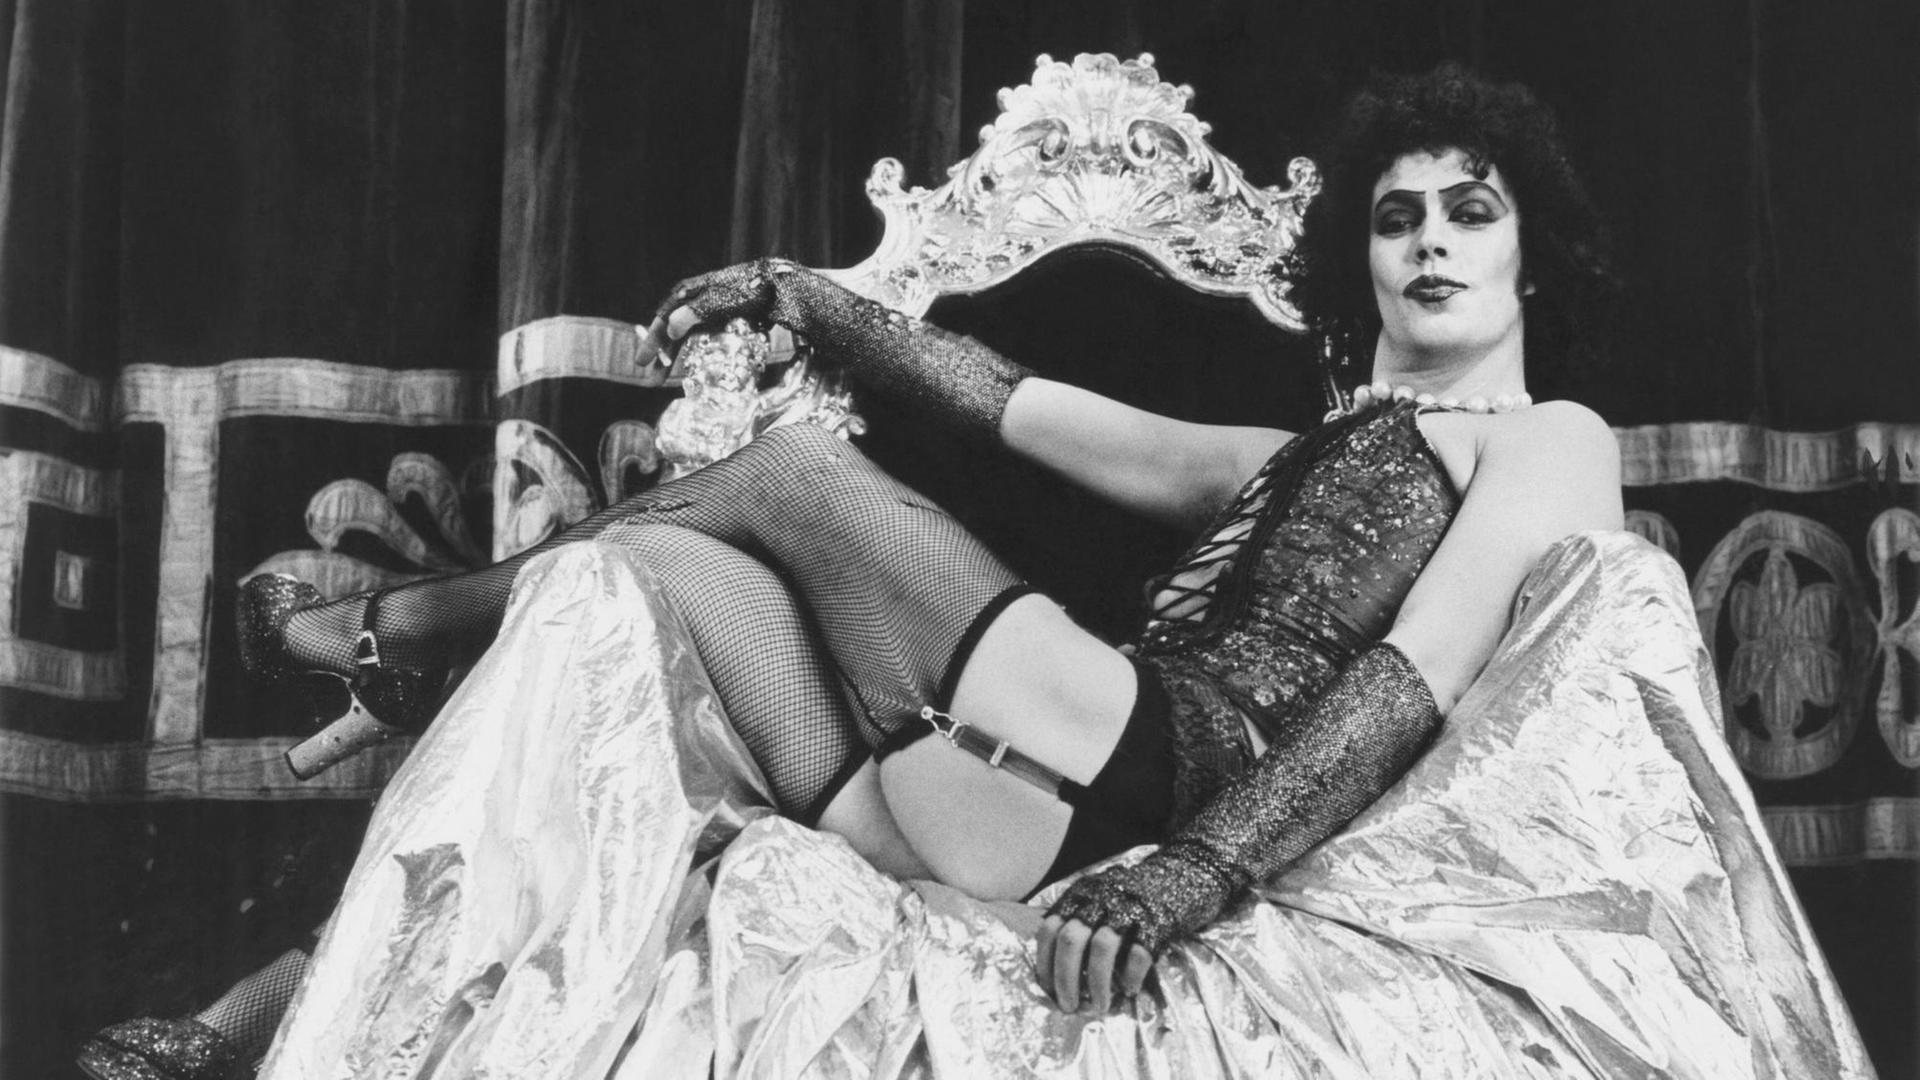 Tim Curry in Strapse in "The Rocky Horror Picture Show", 1975.